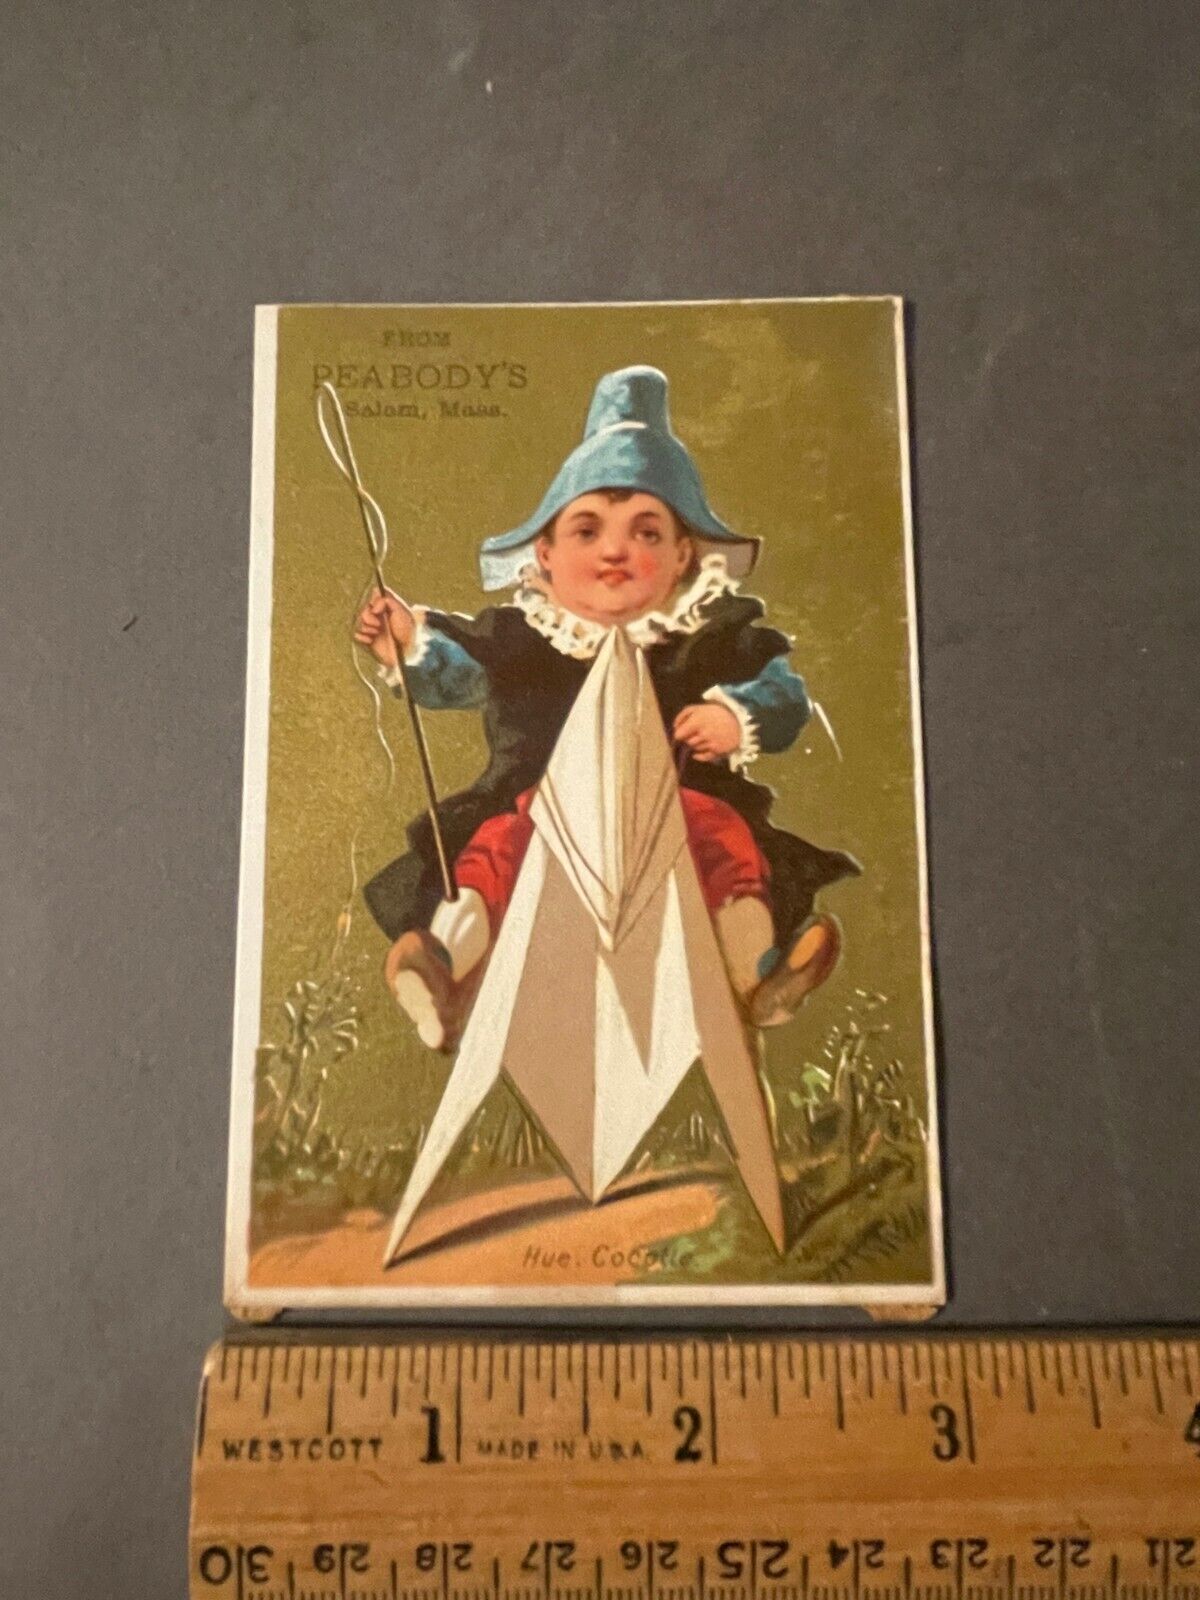 VICTORIAN TRADE CARD MAKE YOUR OWN LOT $5 EACH 10% OFF 2 0R MORE shipping $3